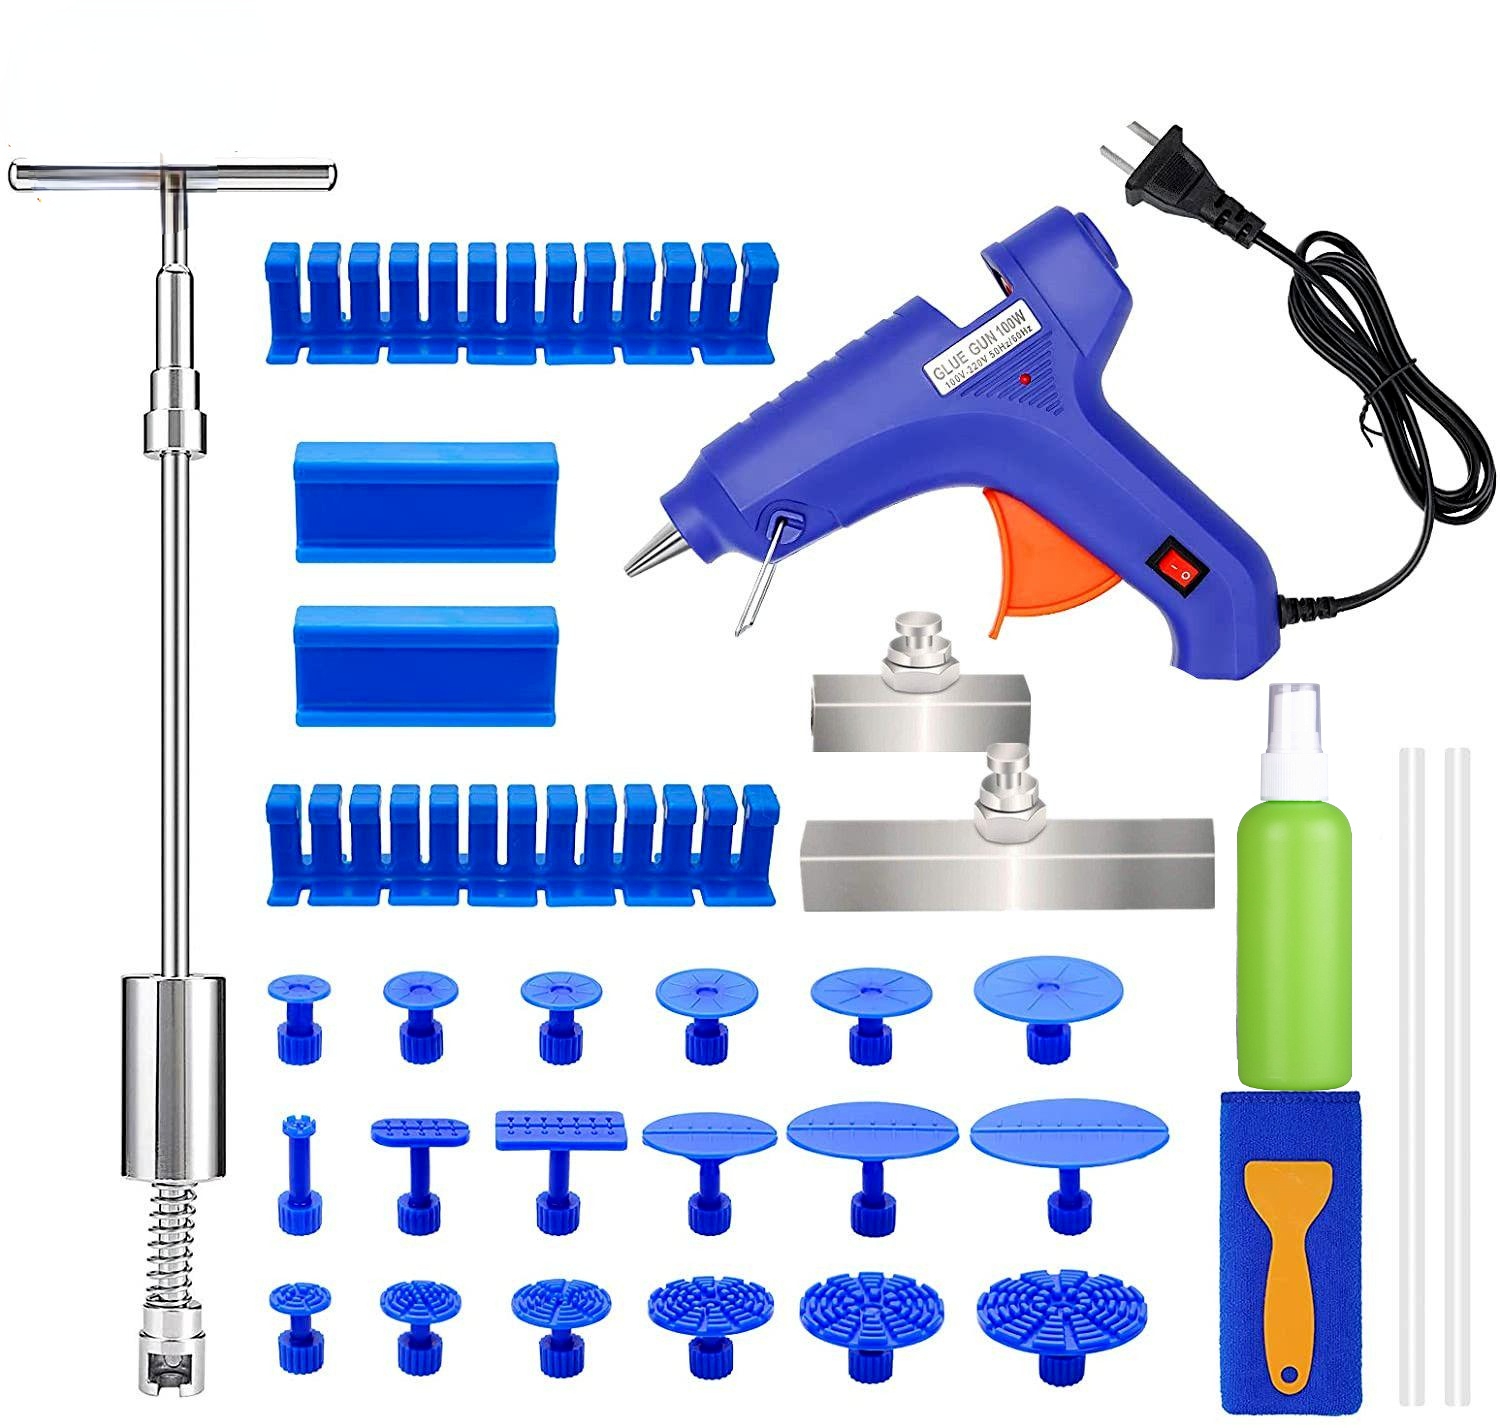 Car Body Dent Puller Auto Repair Kit Dent Remover with T bar Dent Puller for Car Dent Repair and Metal Surface Dent Removal Tool